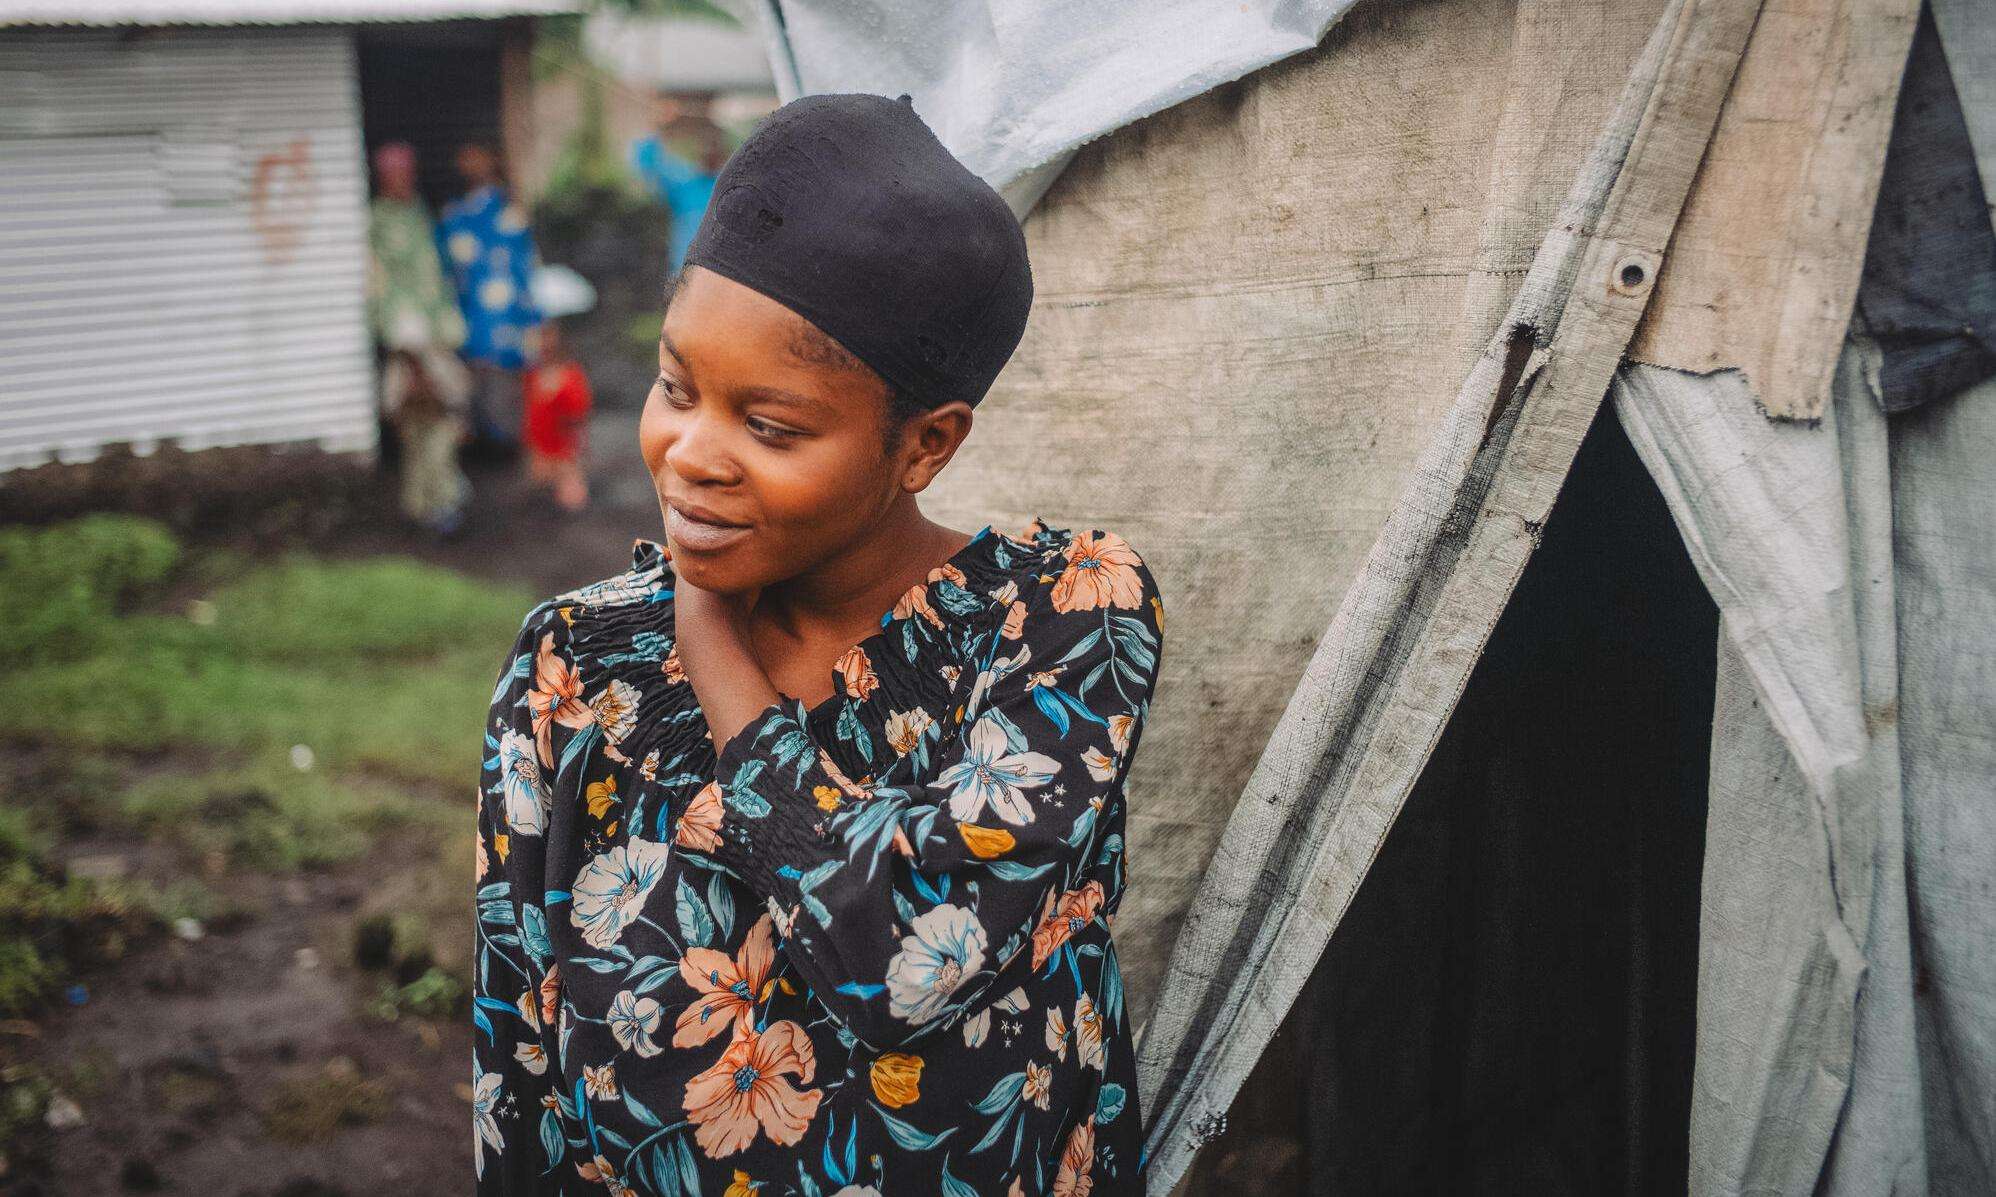 A young woman in front of her makeshift tent in Kanyaruchinya camp for displaced people in DR Congo.